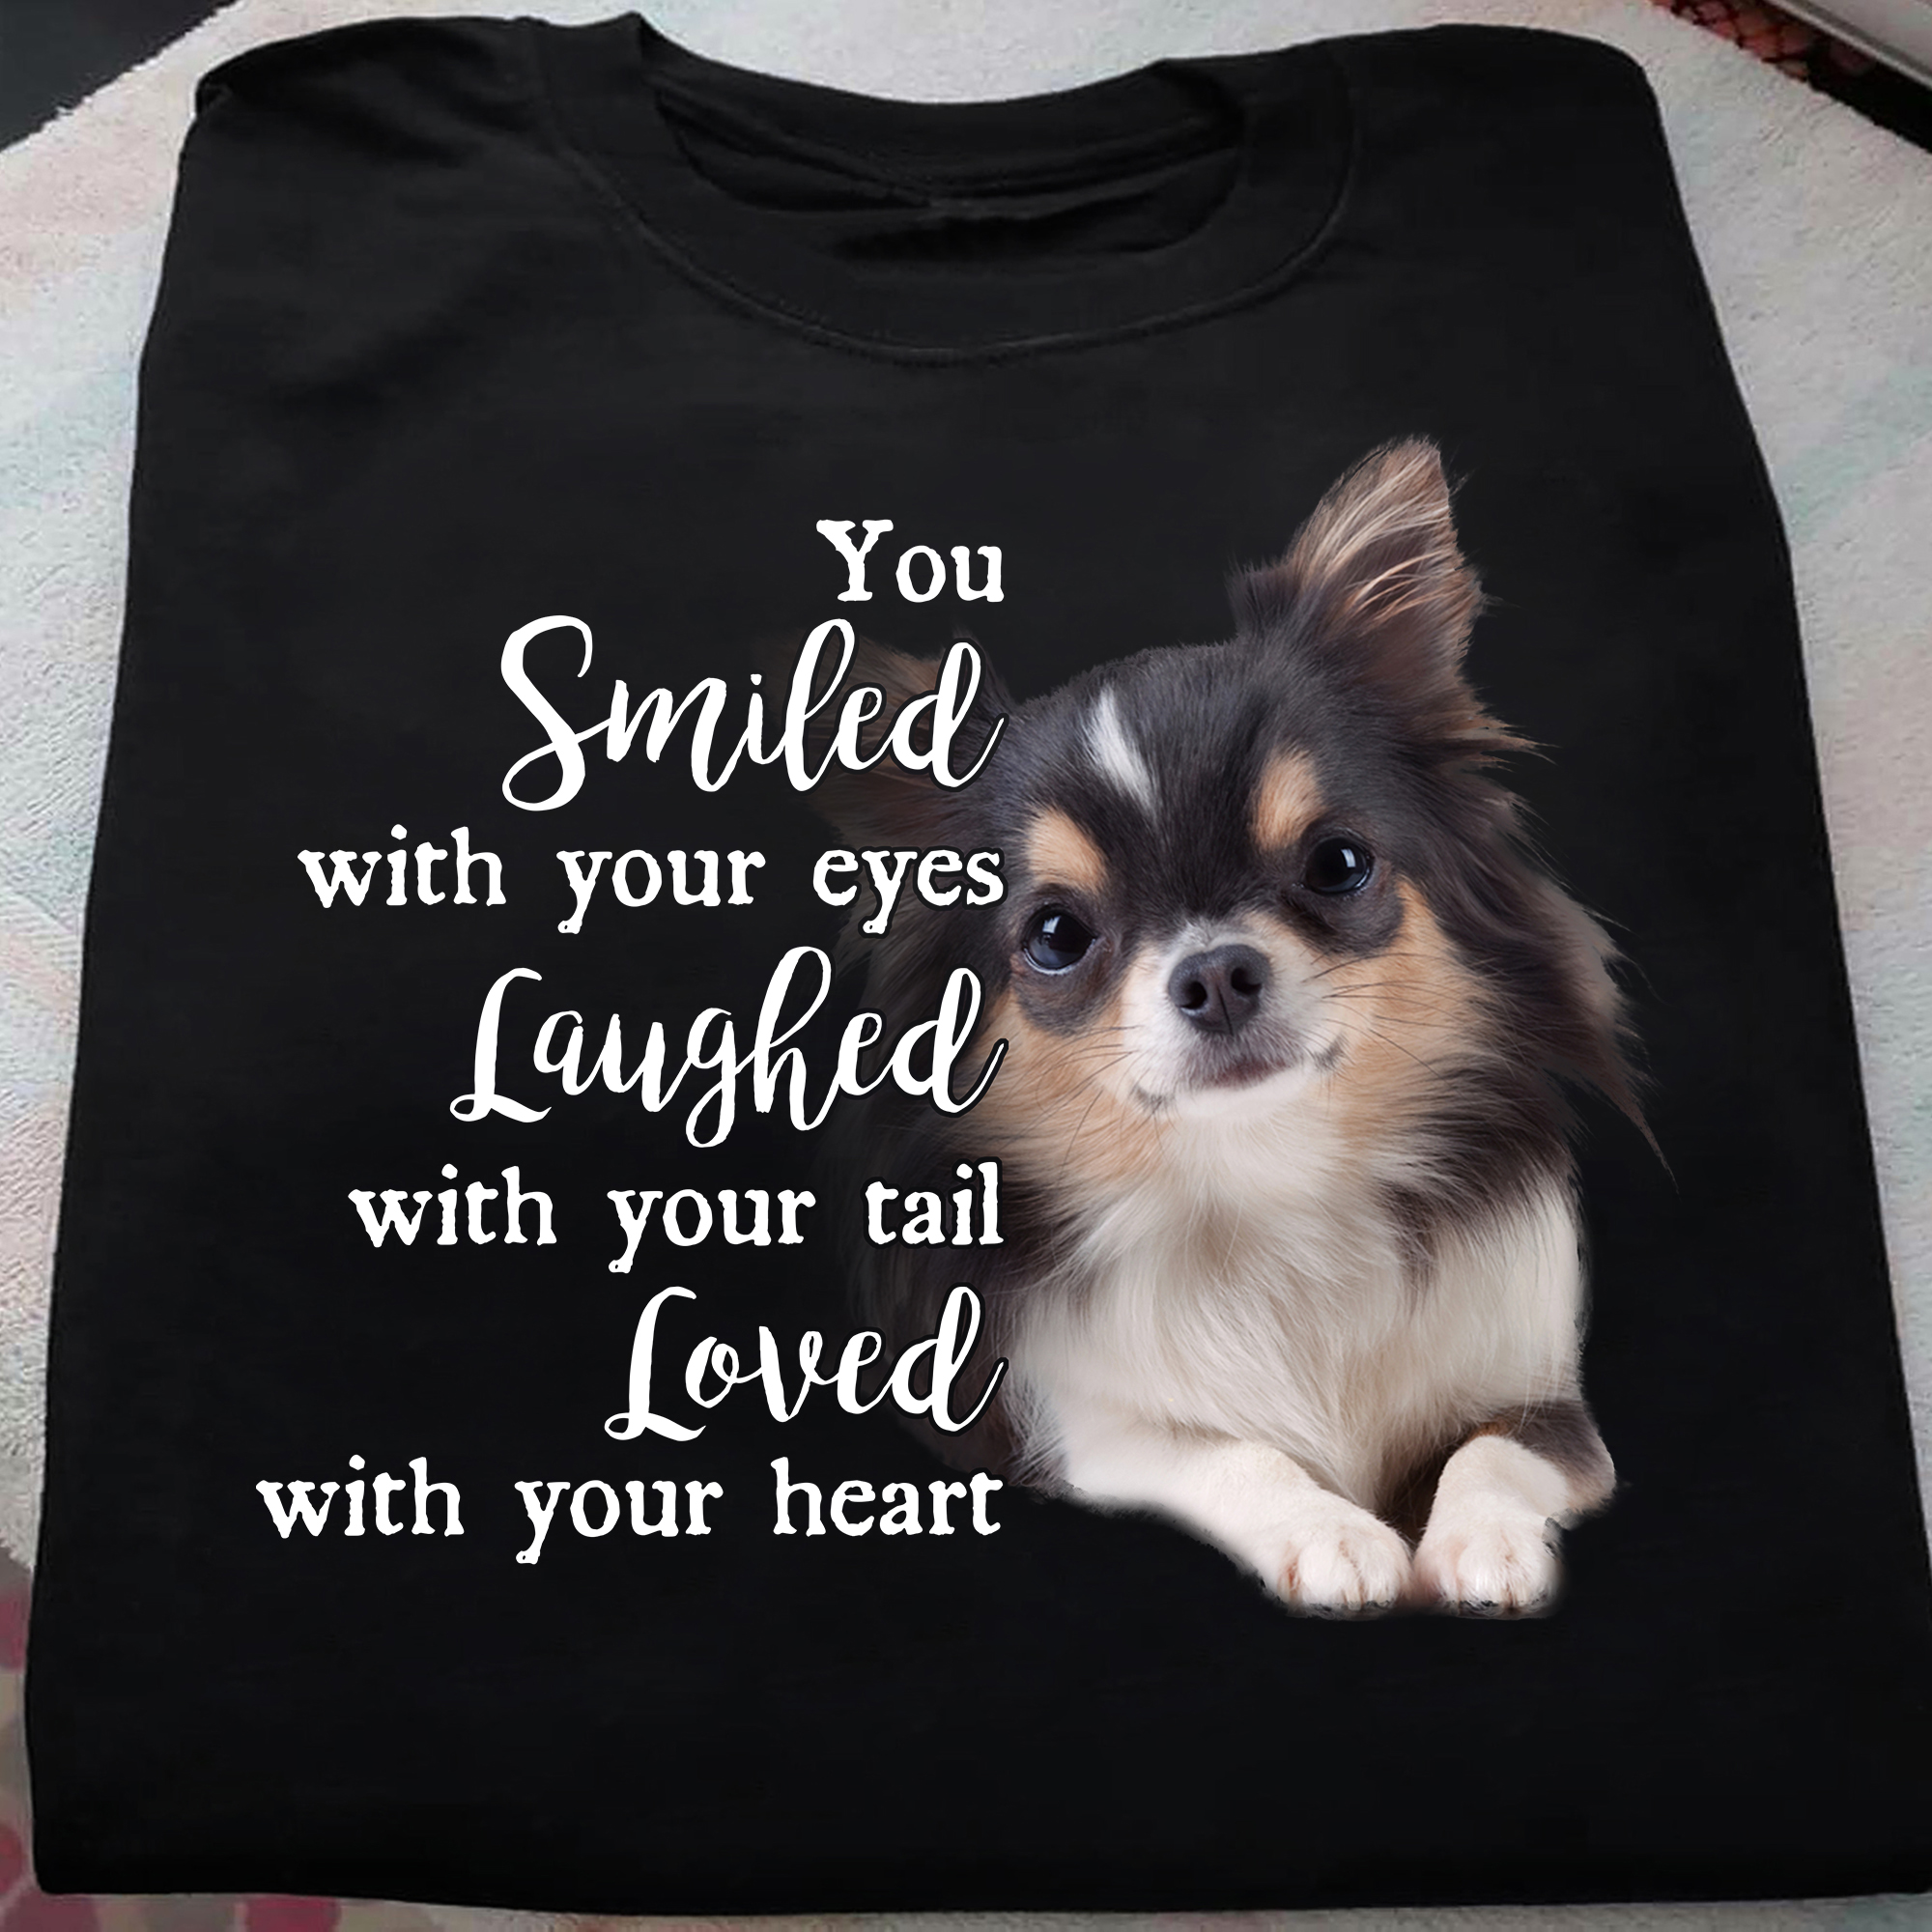 Chihuahua Dog Lover - You Smiled With Your Eyes, Laughed With Your Tail, Loved With Your Heart